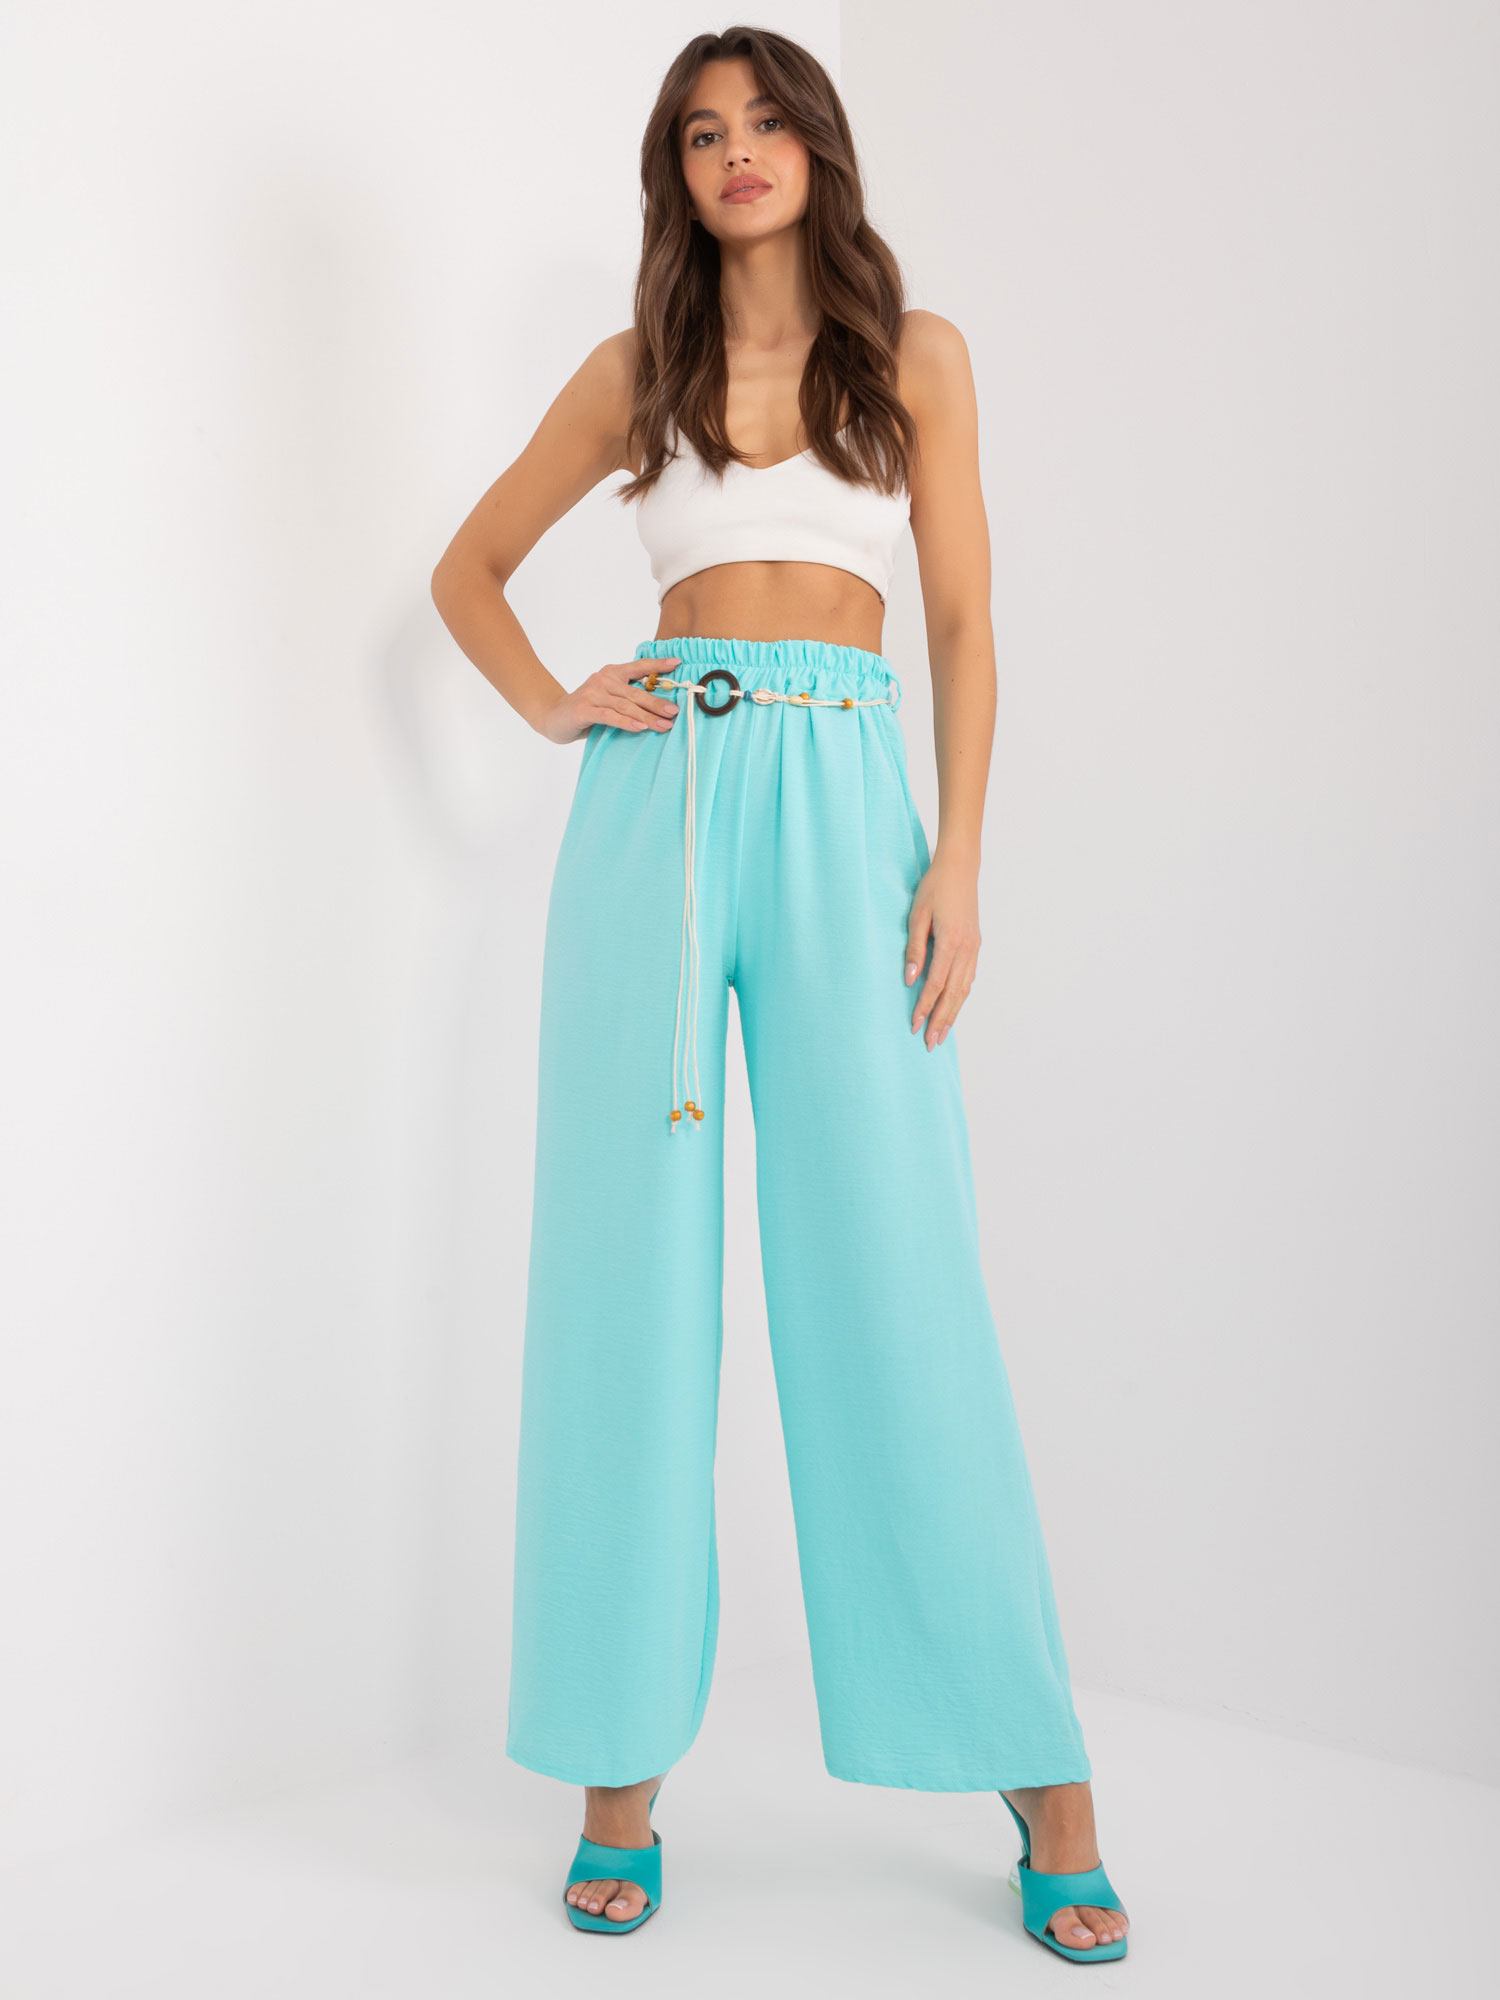 Summer trousers made of mint fabric